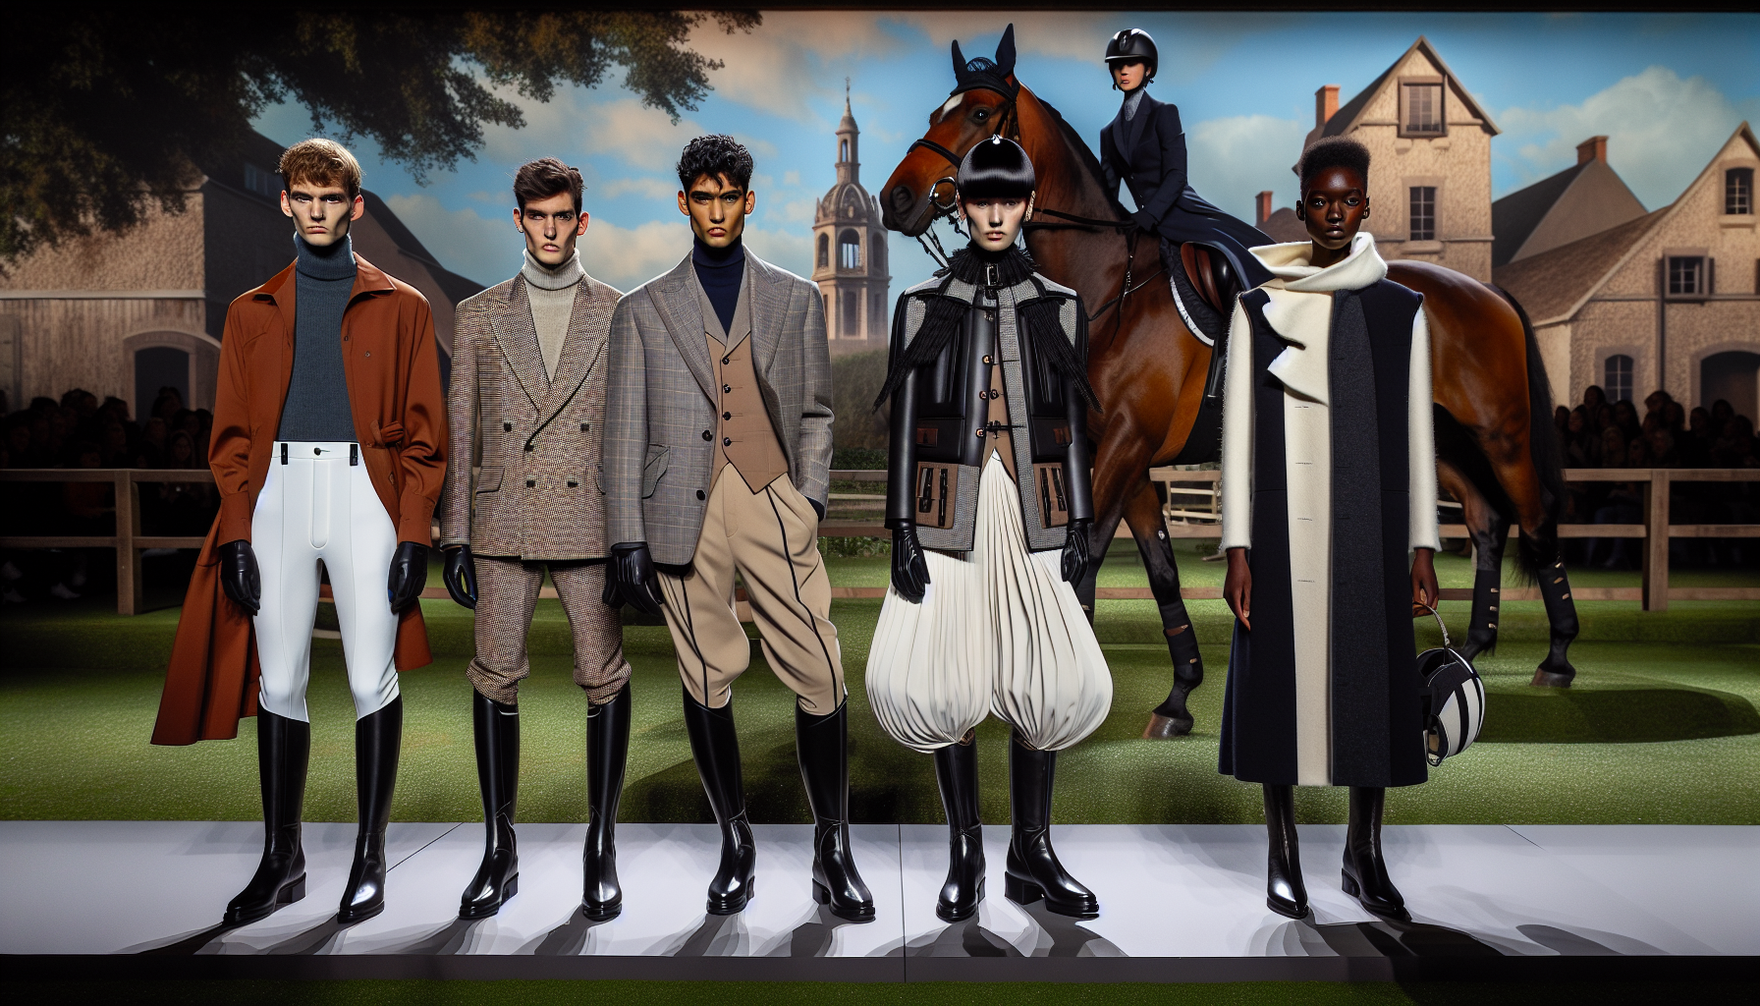 A snapshot from a future runways show featuring 2023's equestrian fashion trends. A diverse collection of male and female models wearing innovative designs drawing inspiration from horse riding gear. 